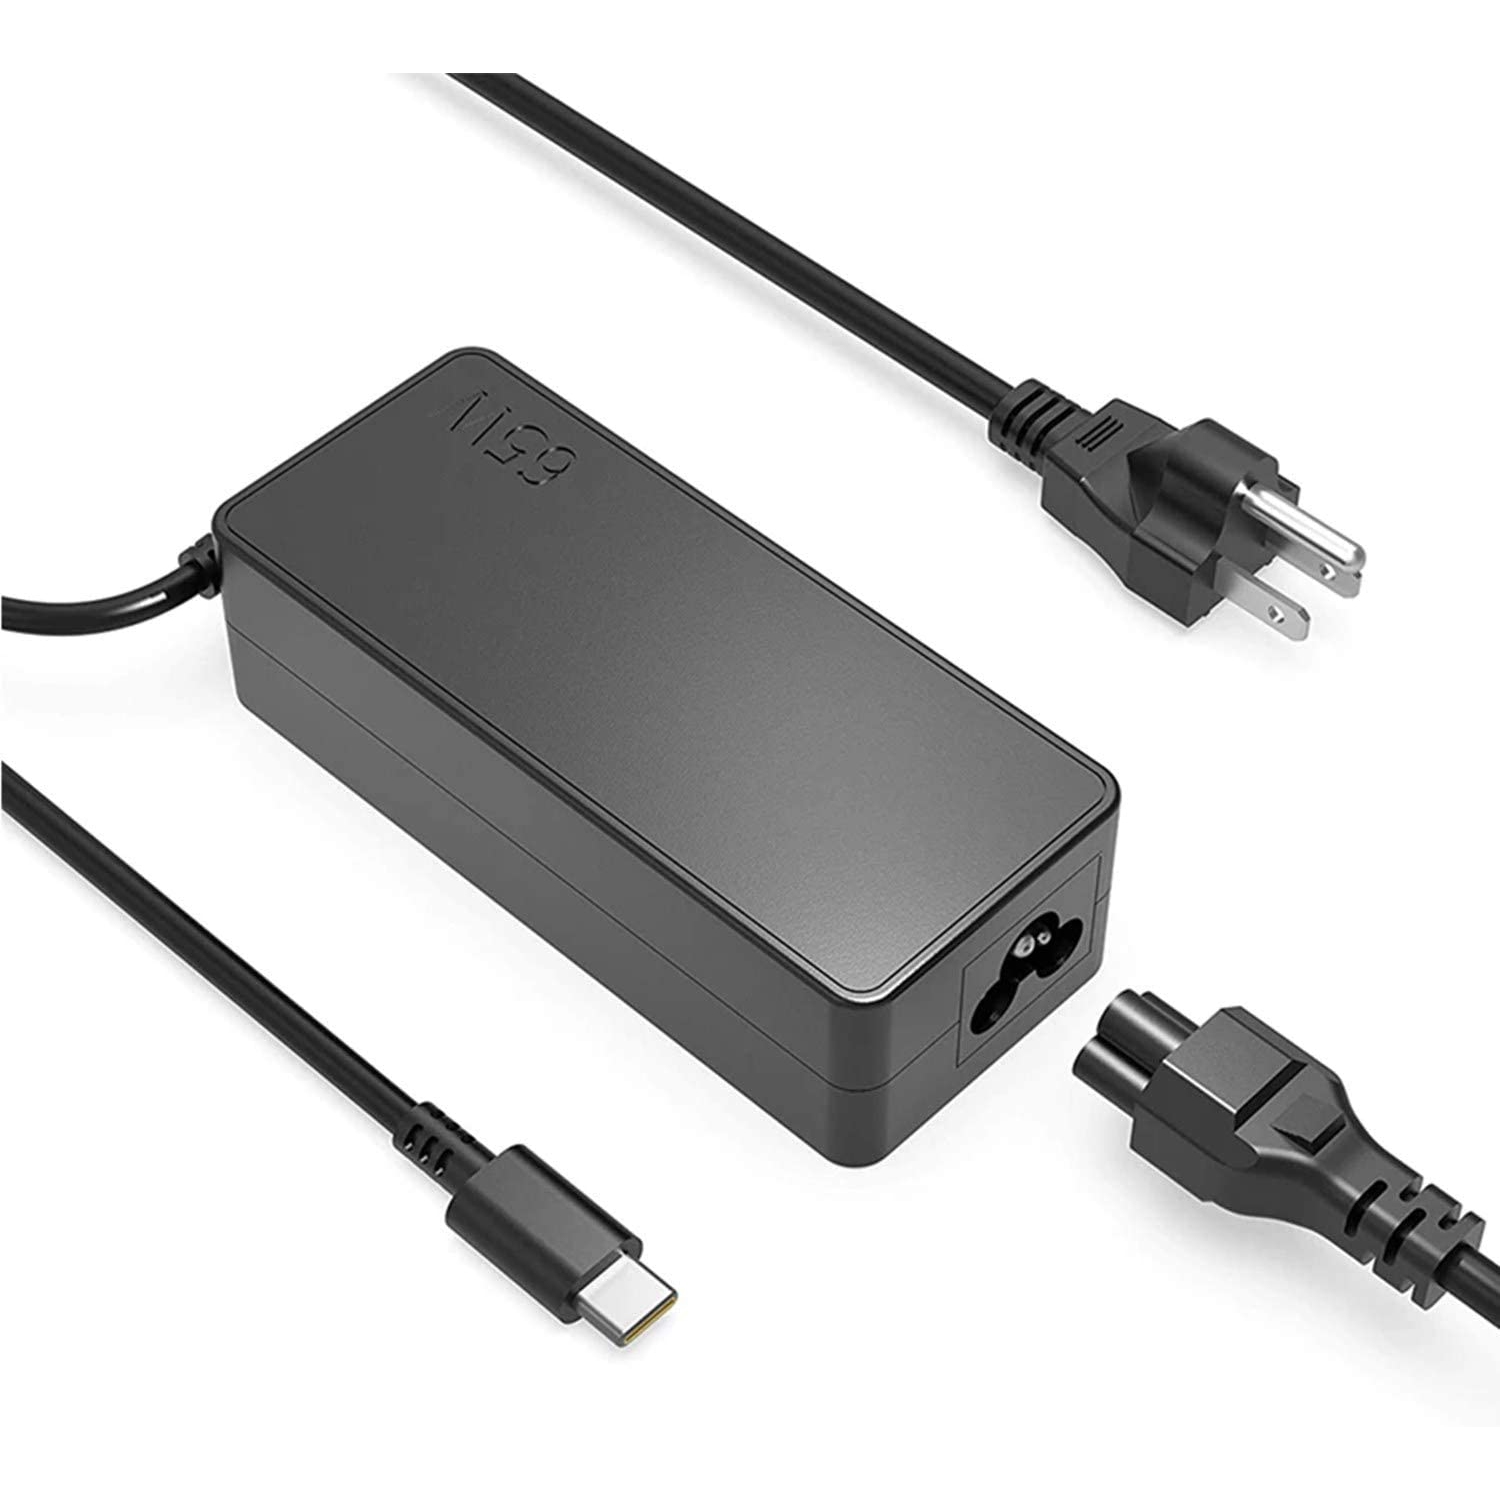 Type-C Laptop Charger 65W for Lenovo Adapter: Chromebook C330 S330 100e  Yoga C930 C940 S730 720 730 910 920 13 IdeaPad | Best Buy Canada